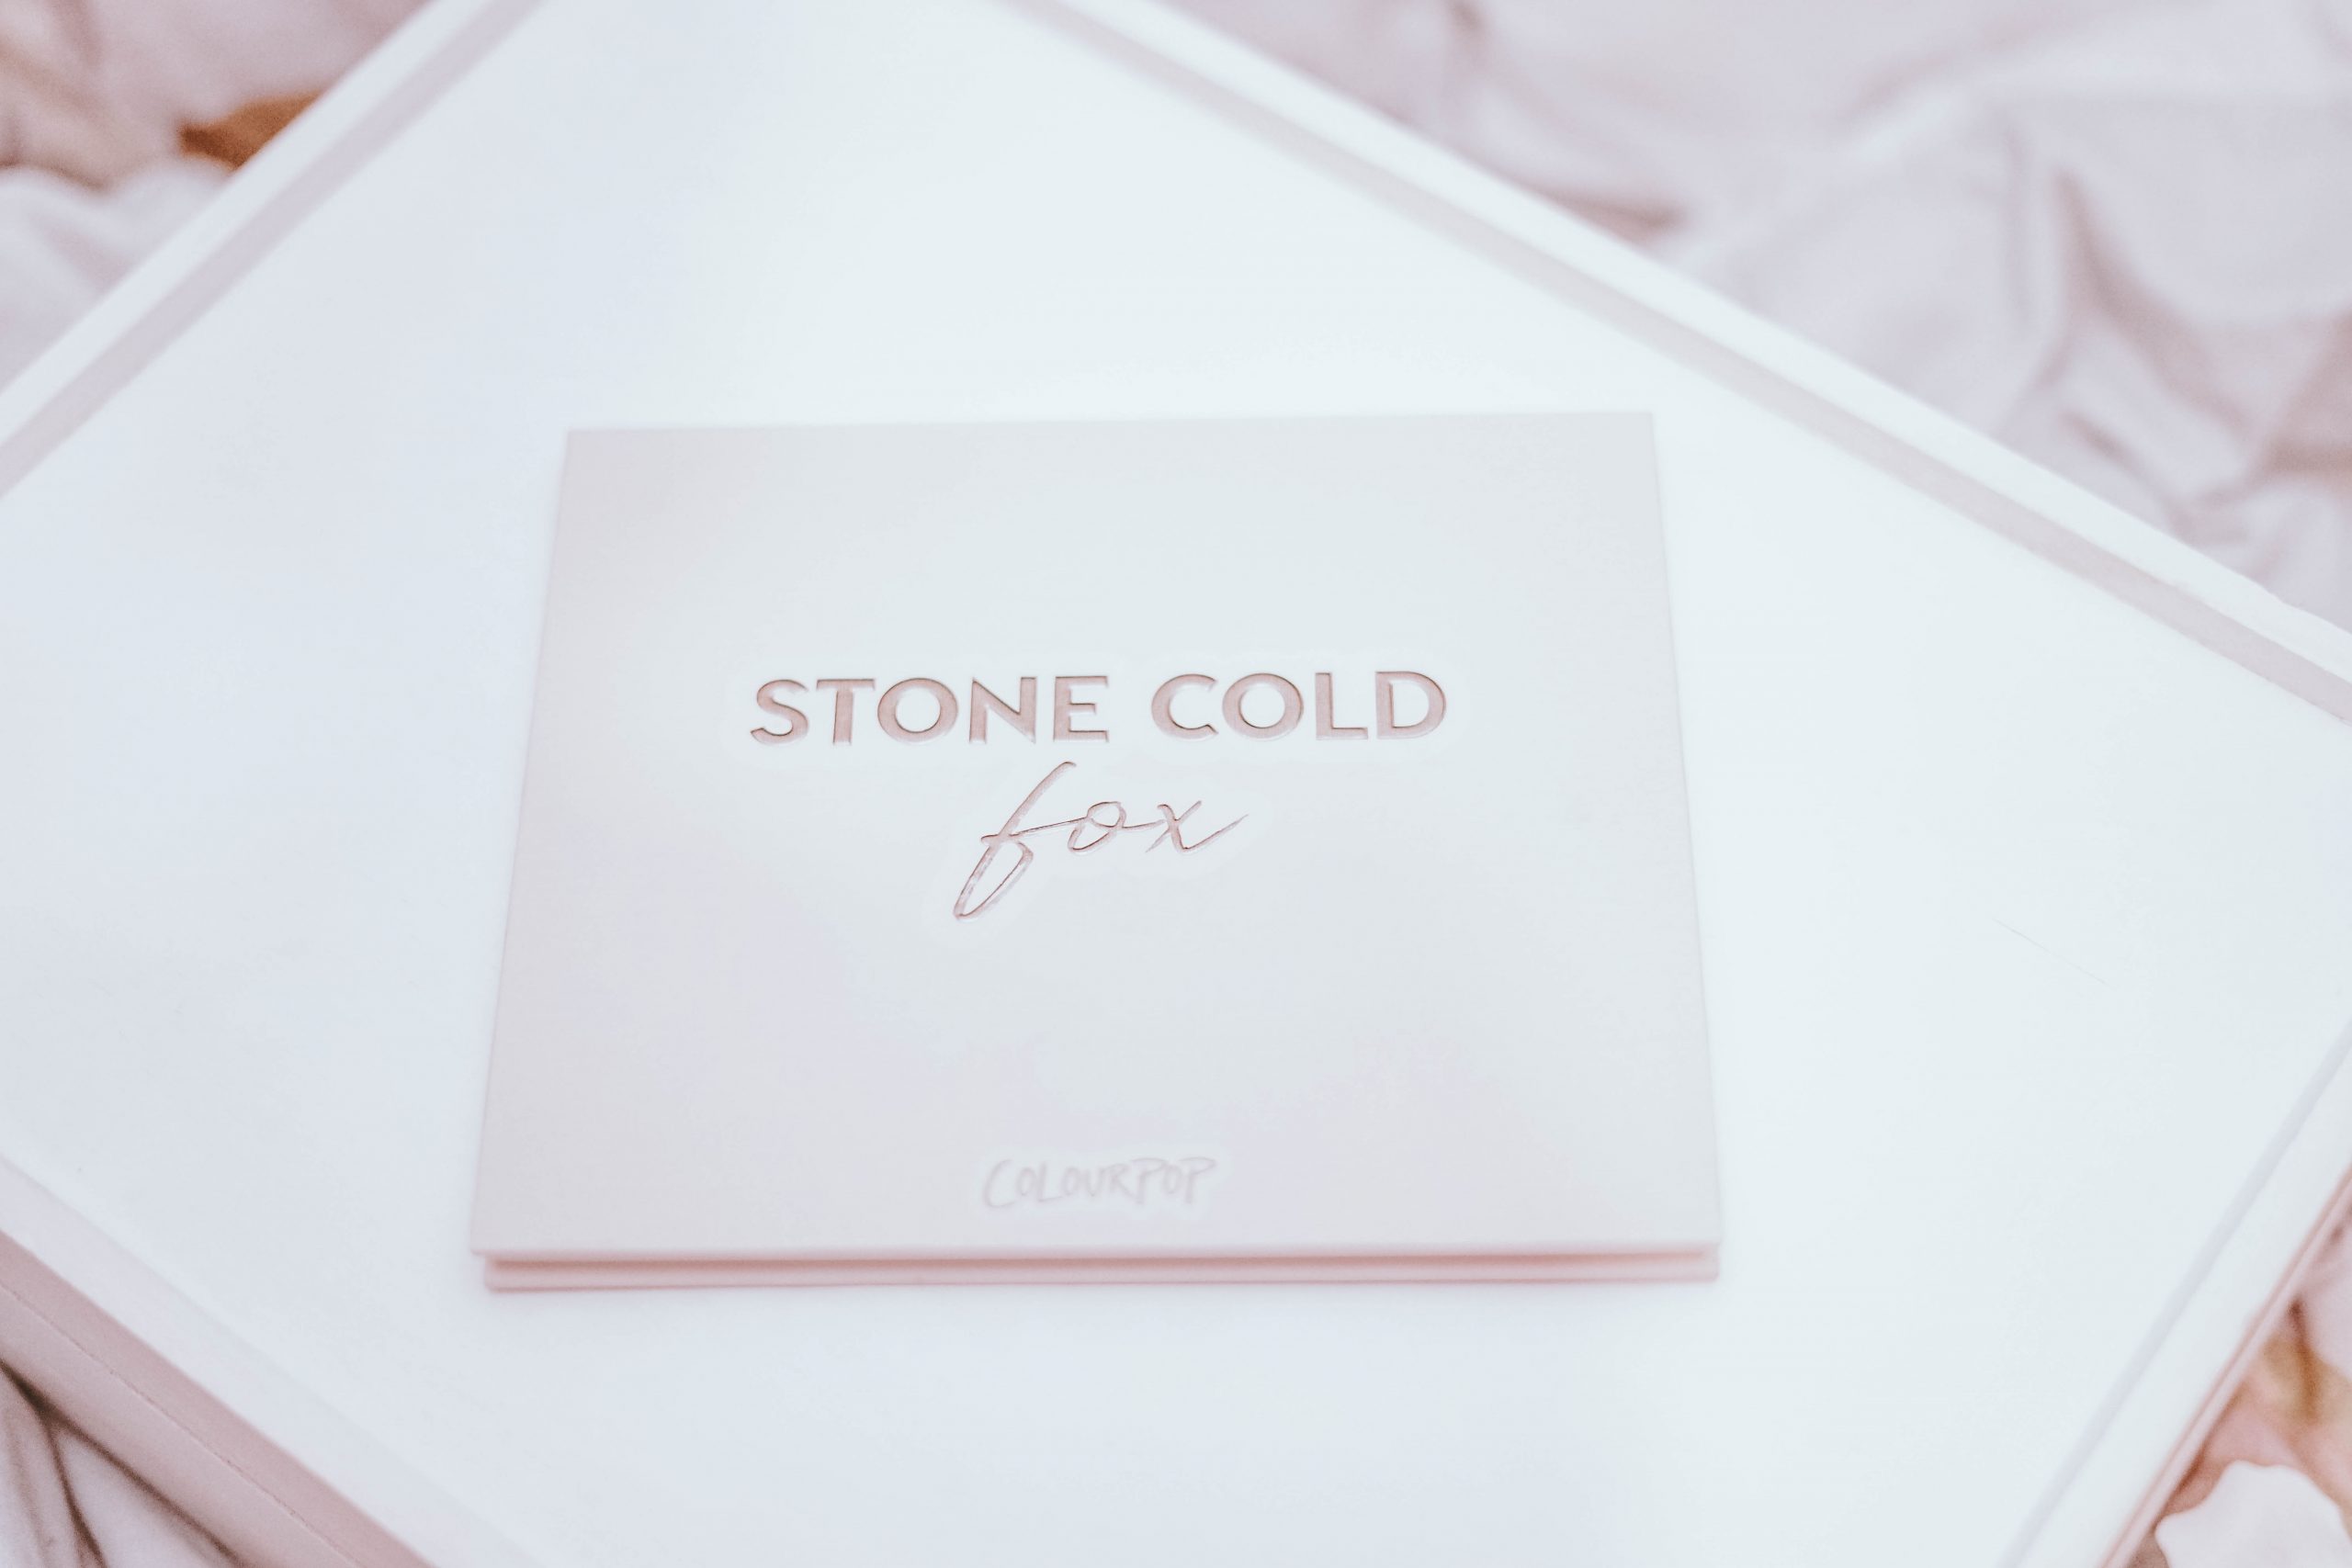 Colourpop Stone Cold Fox Palette (Review and Giveaway Info)